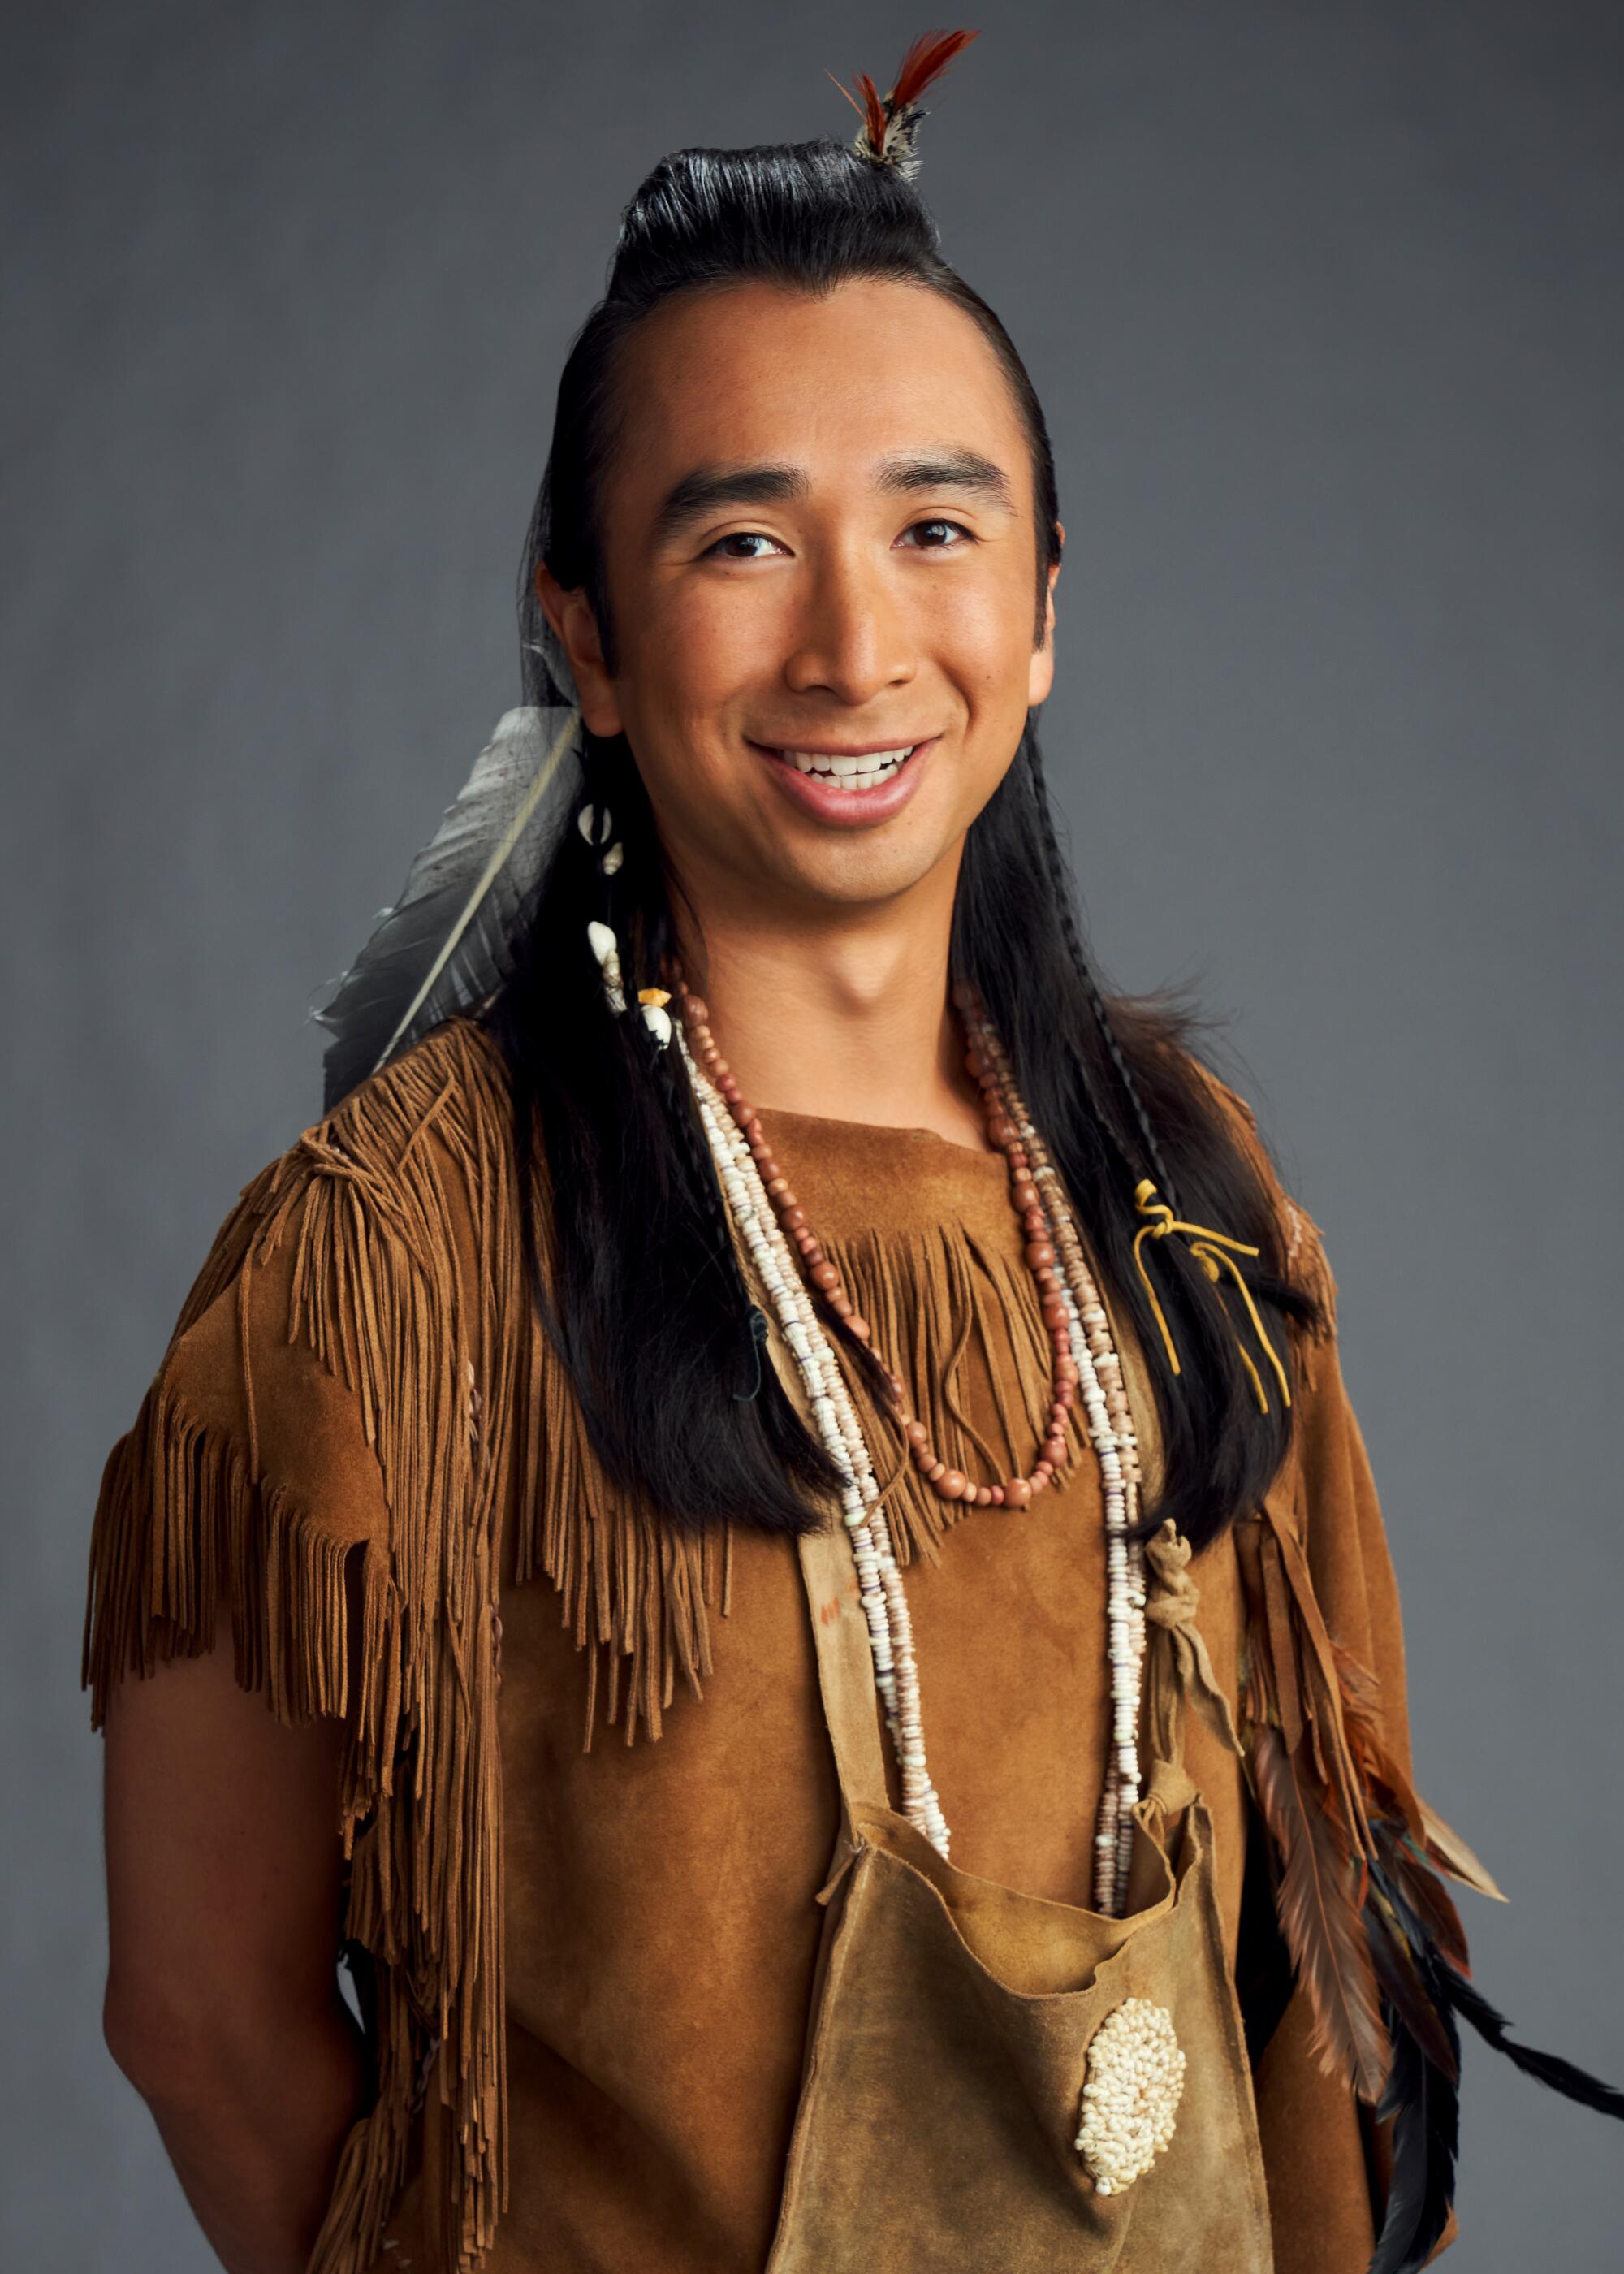 Roman Zaragoza as Sasappis, is dressed as a Native American.